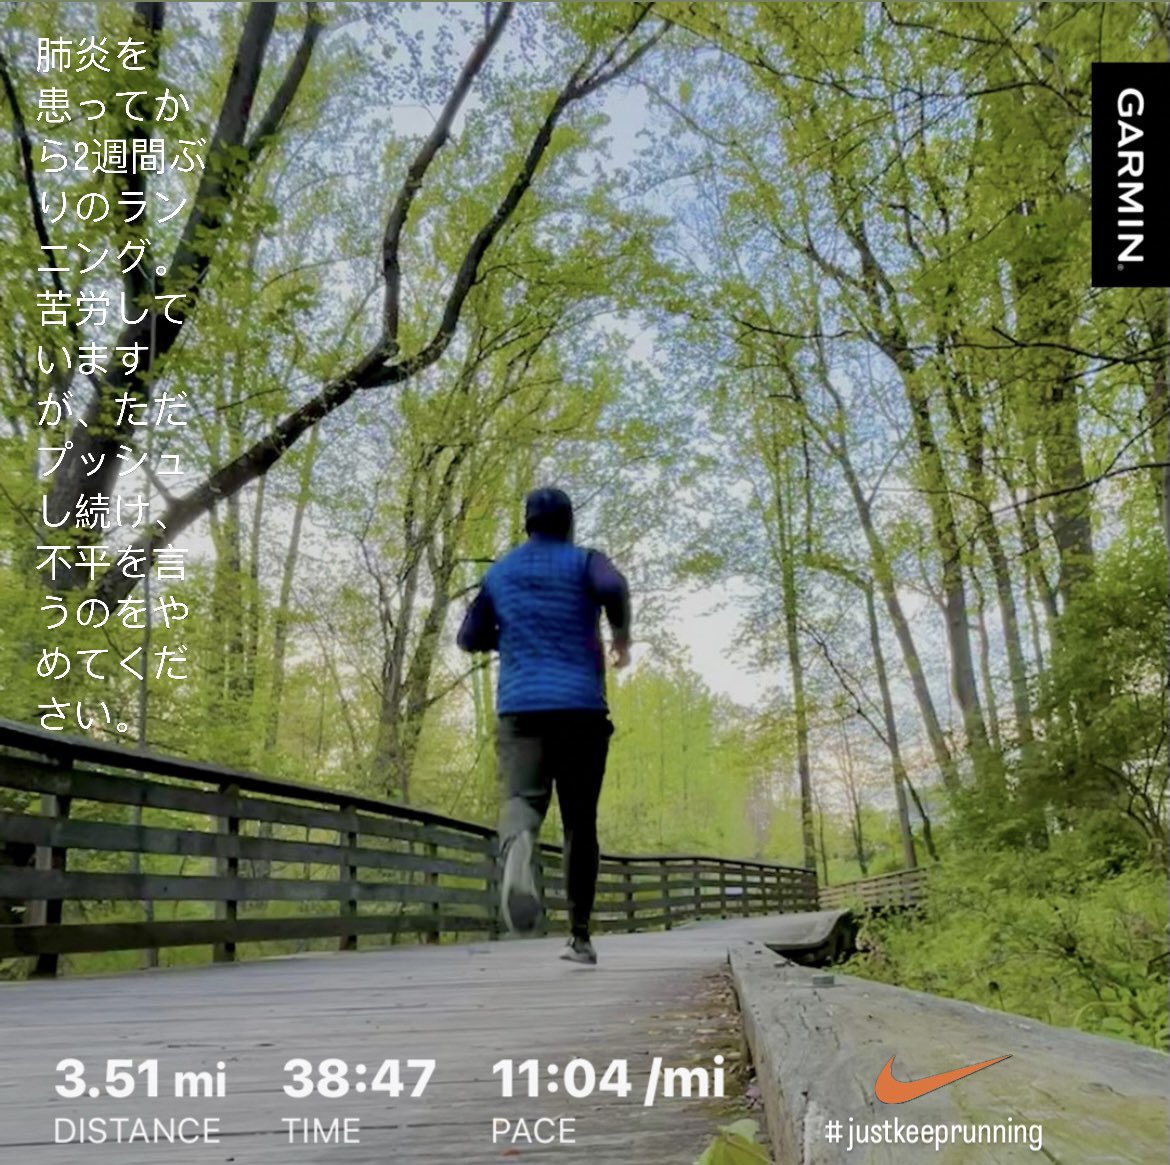 First run in two weeks after getting hit with pneumonia. Struggling but just kept on pushing and I stopped complaining.
.
.
.
#run #clarksburgmdrun #justkeeprunning #thursdayvibes #nike #nikerunning #zoomfly3 #garmin #instarunners #runkeeper #dcmetrolife #alsigns #themarquez